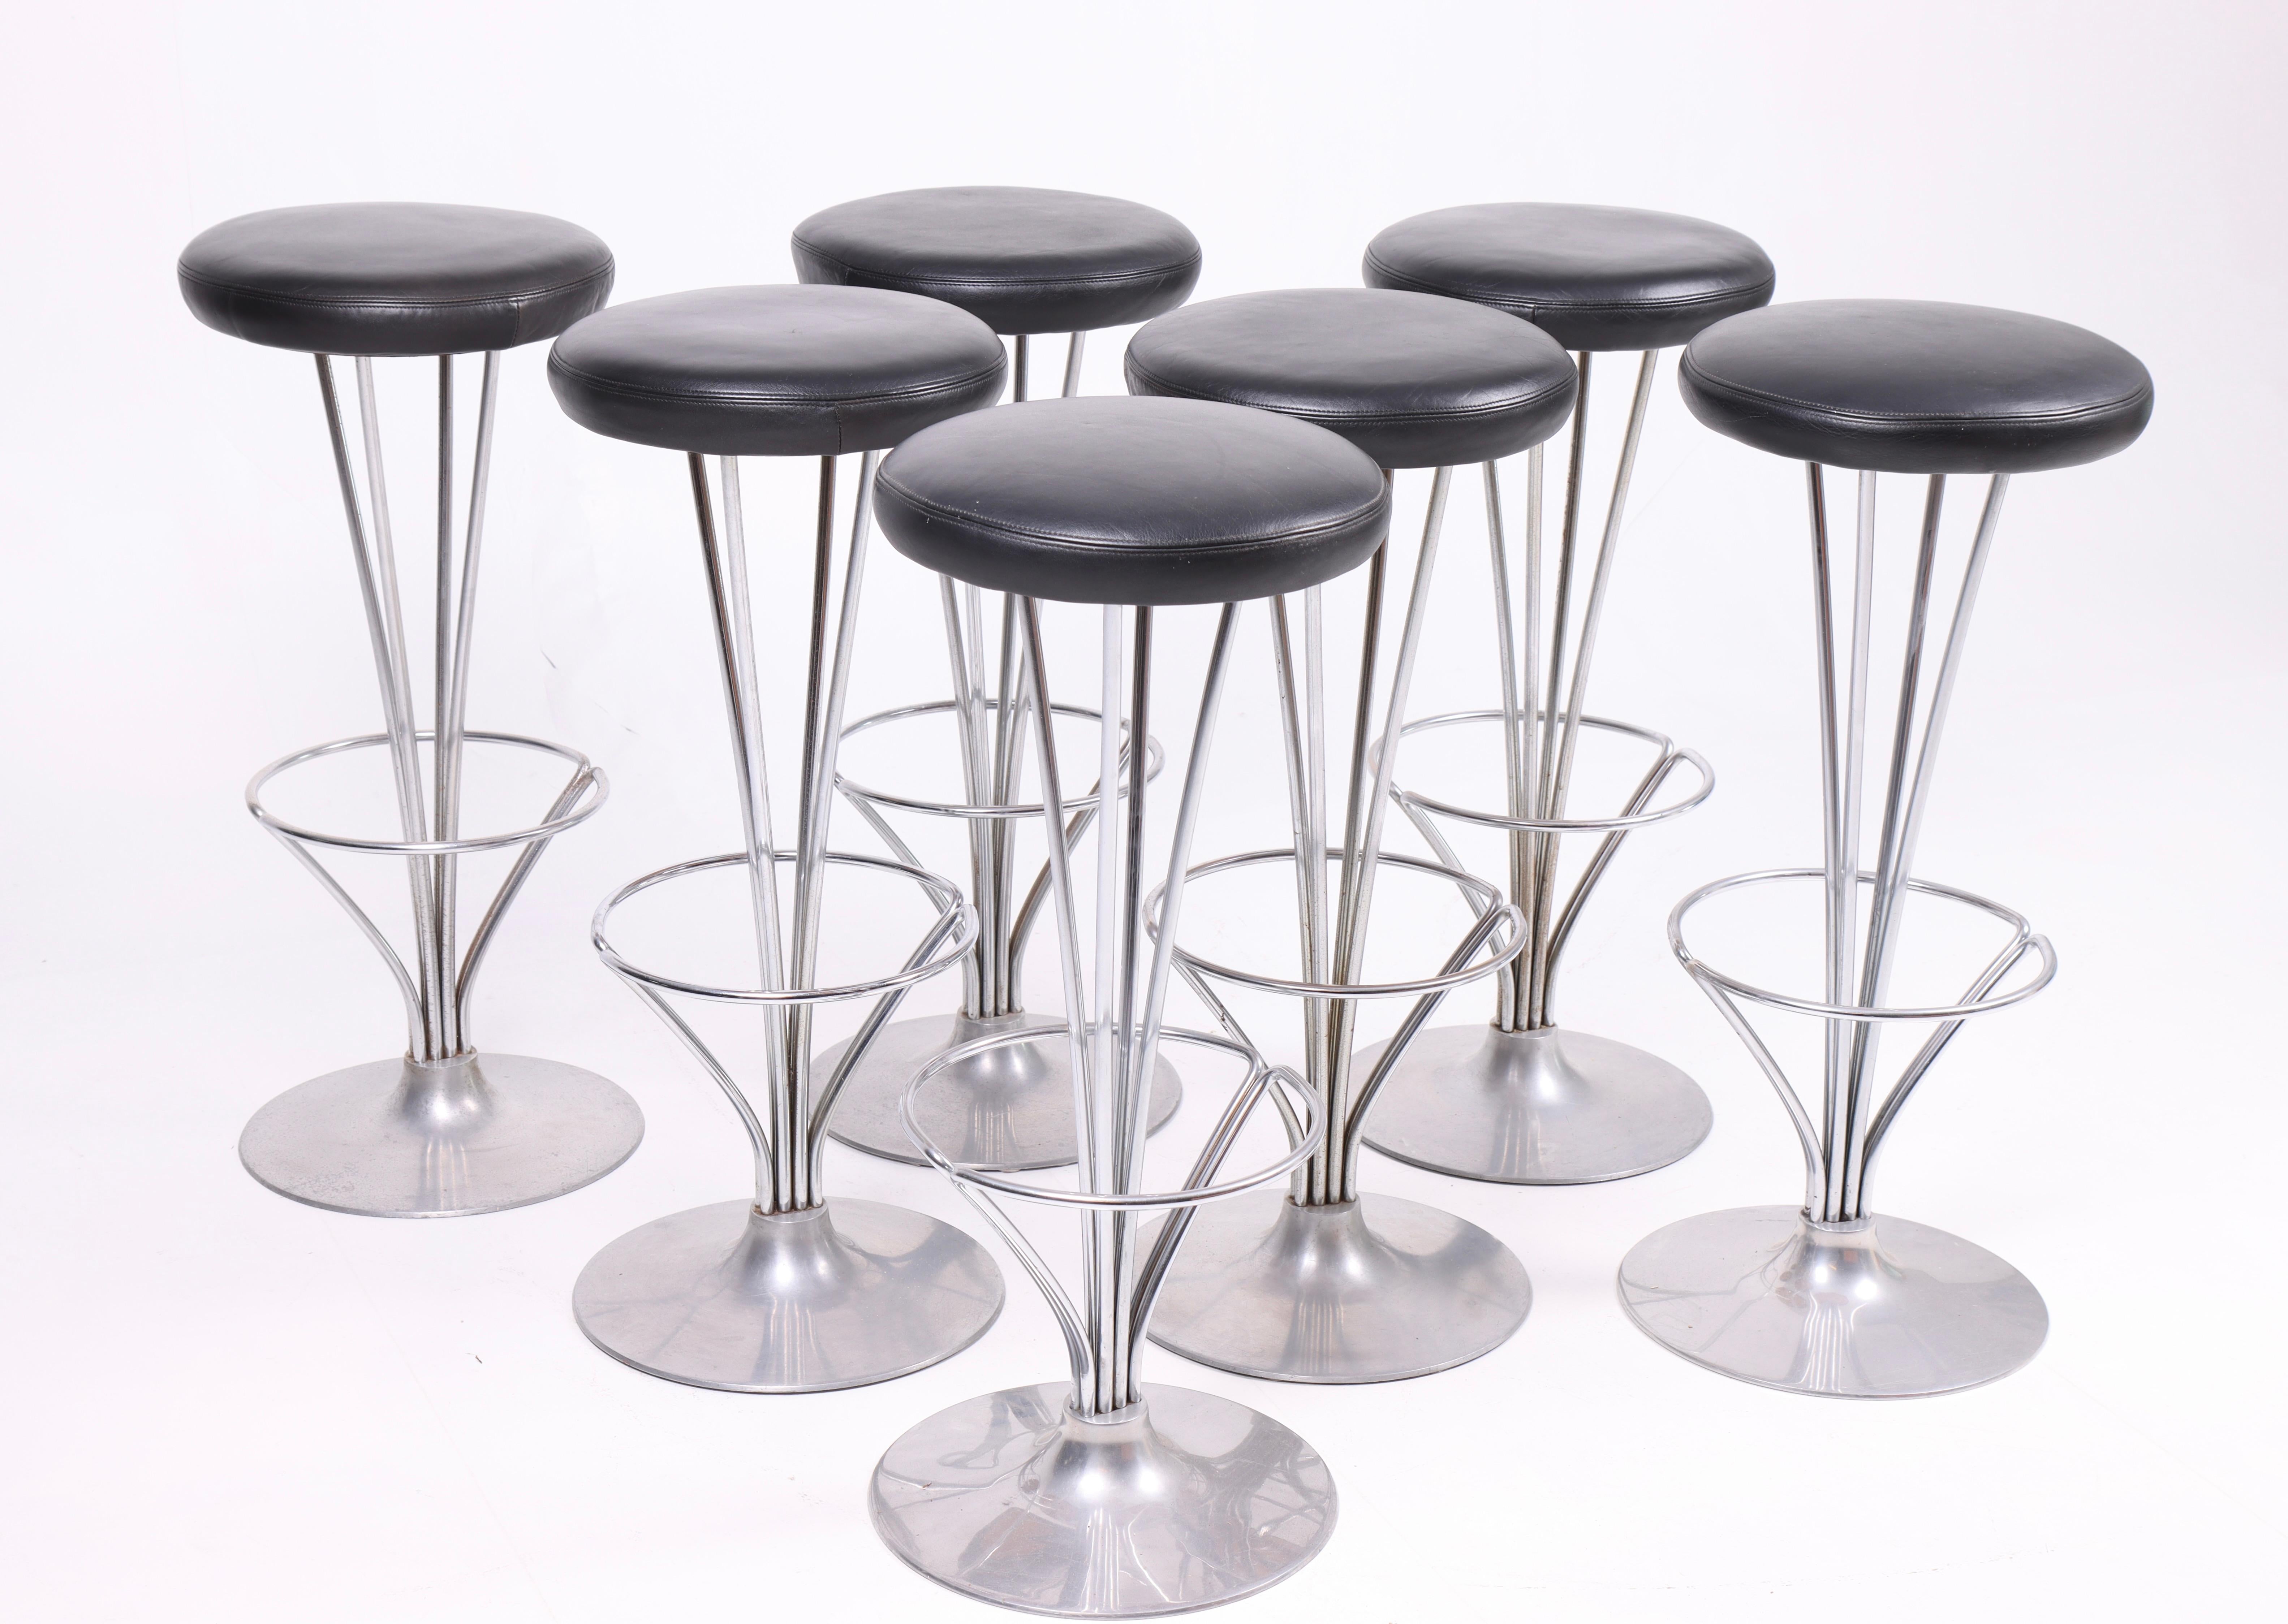 Set of Seven Barstools in Patinated Leather by Piet Hein, Danish, 1960s For Sale 3